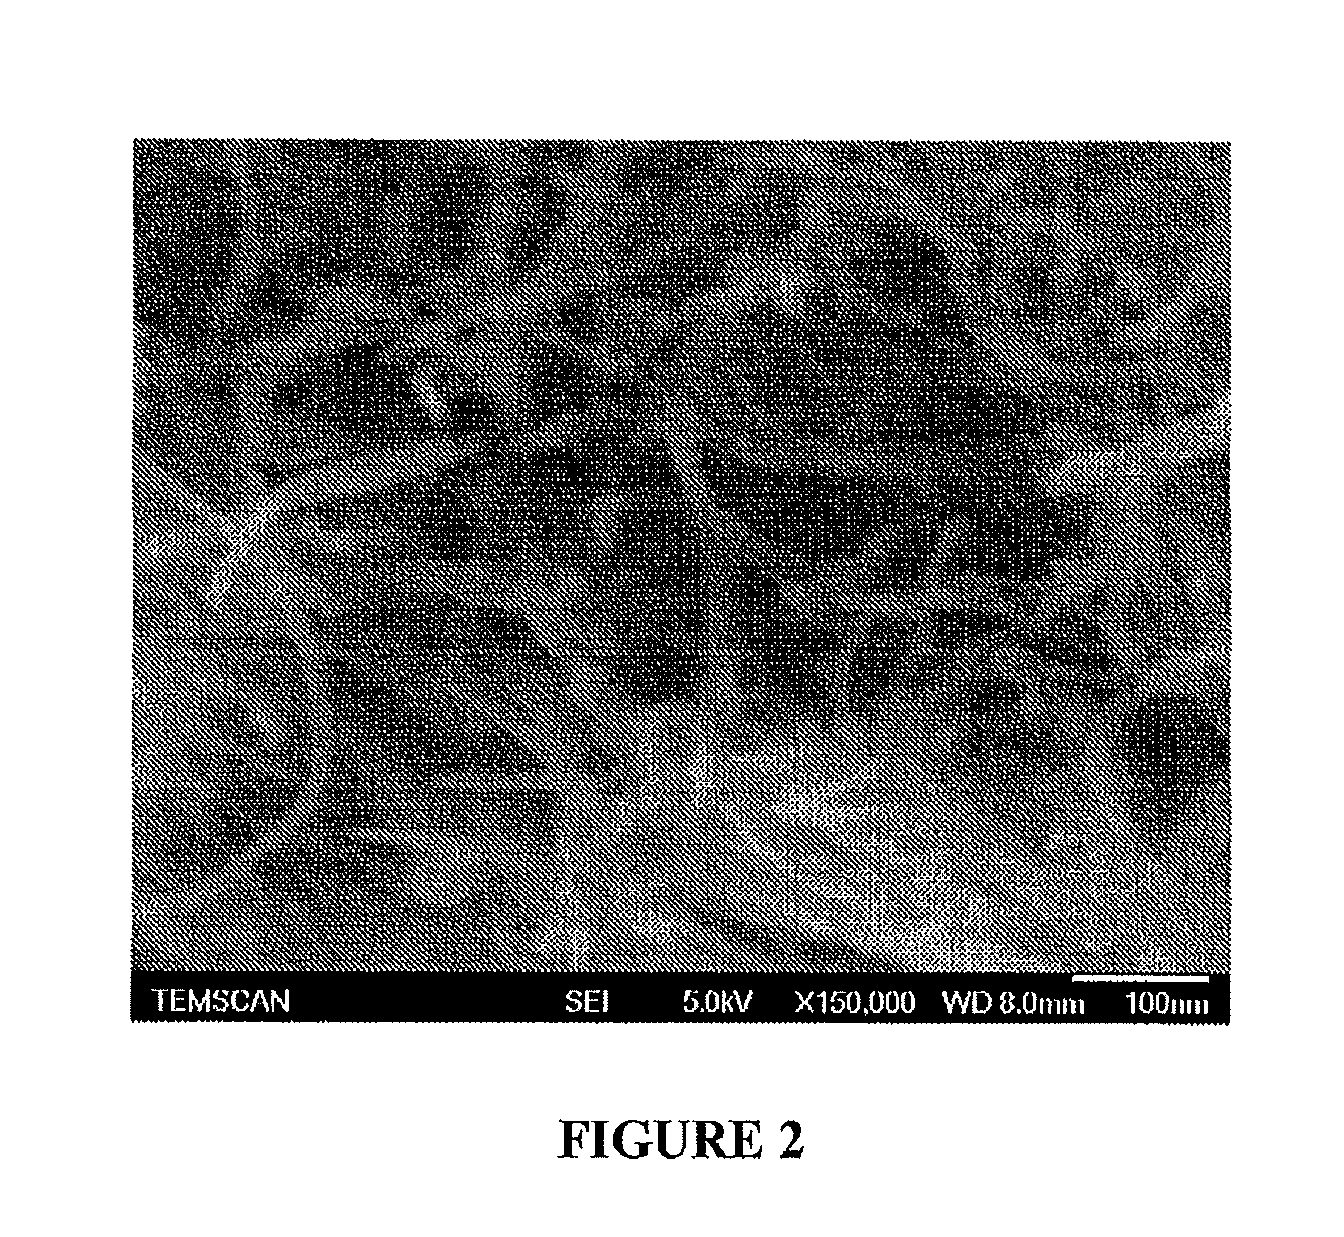 METHOD FOR MANUFACTURING A COMPOSITE MATERIAL OF SnO2 AND CARBON NANOTUBES AND/OR CARBON NANOFIBERS, MATERIAL OBTAINED BY THE METHOD, AND LITHIUM BATTERY ELECTRODE COMPRISING SAID MATERIAL